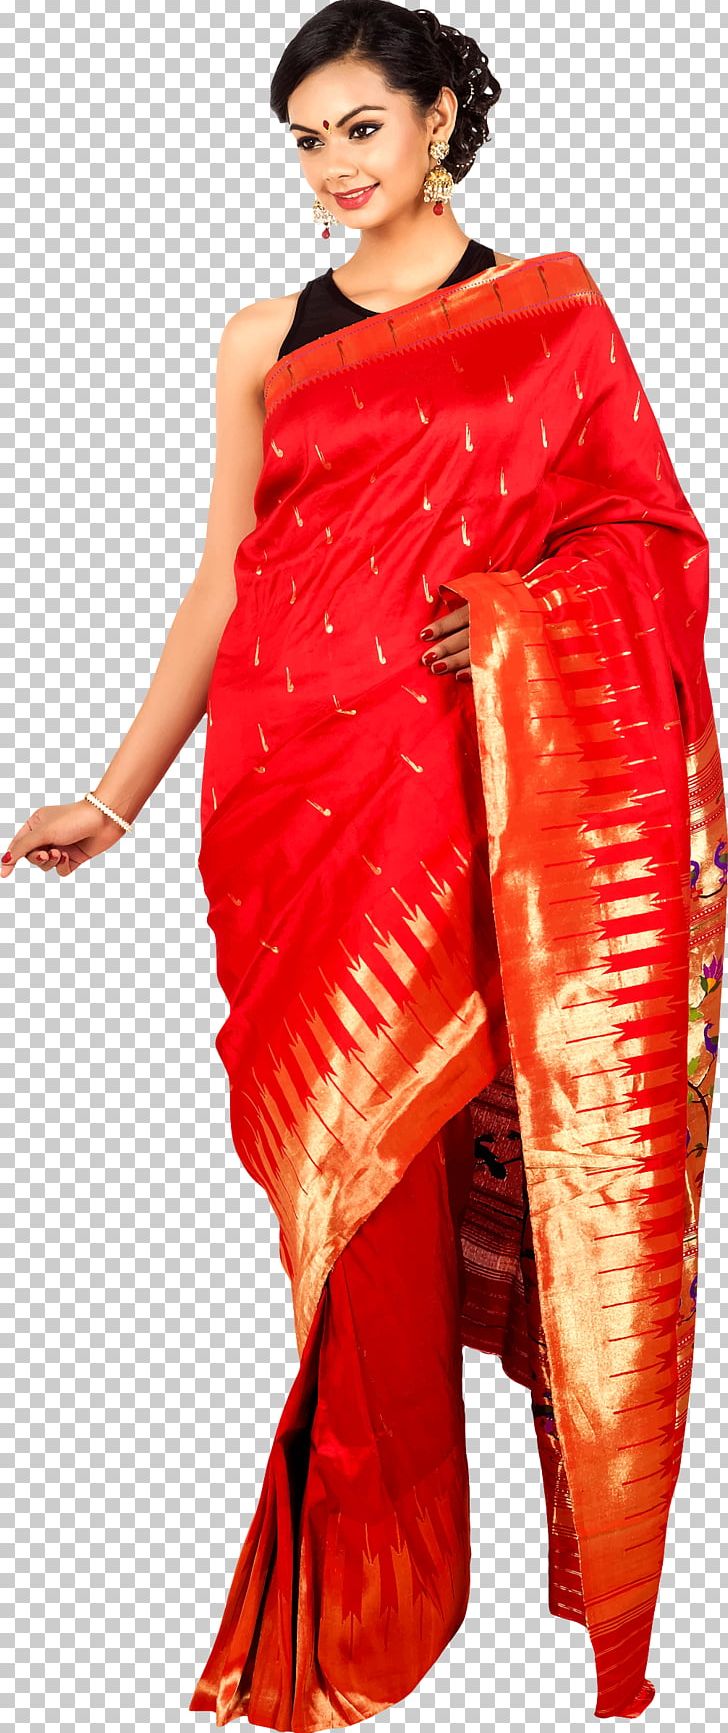 Clothing Sari Dress Online Shopping Fashion PNG, Clipart, Brand, Clothing, Costume, Customer, Dress Free PNG Download